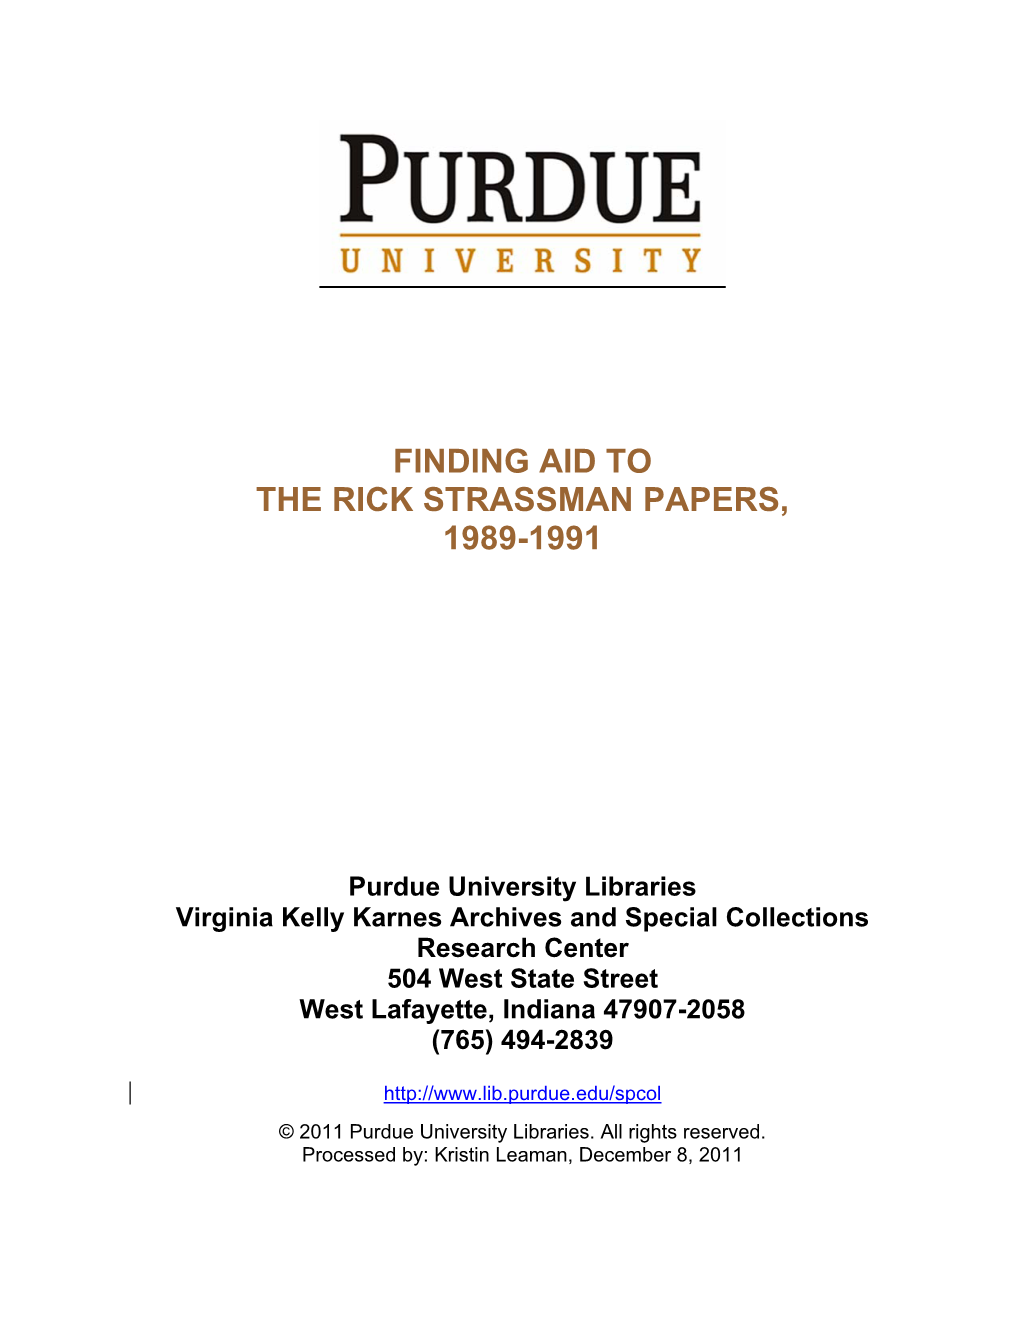 Finding Aid to the Rick Strassman Papers, 1989-1991